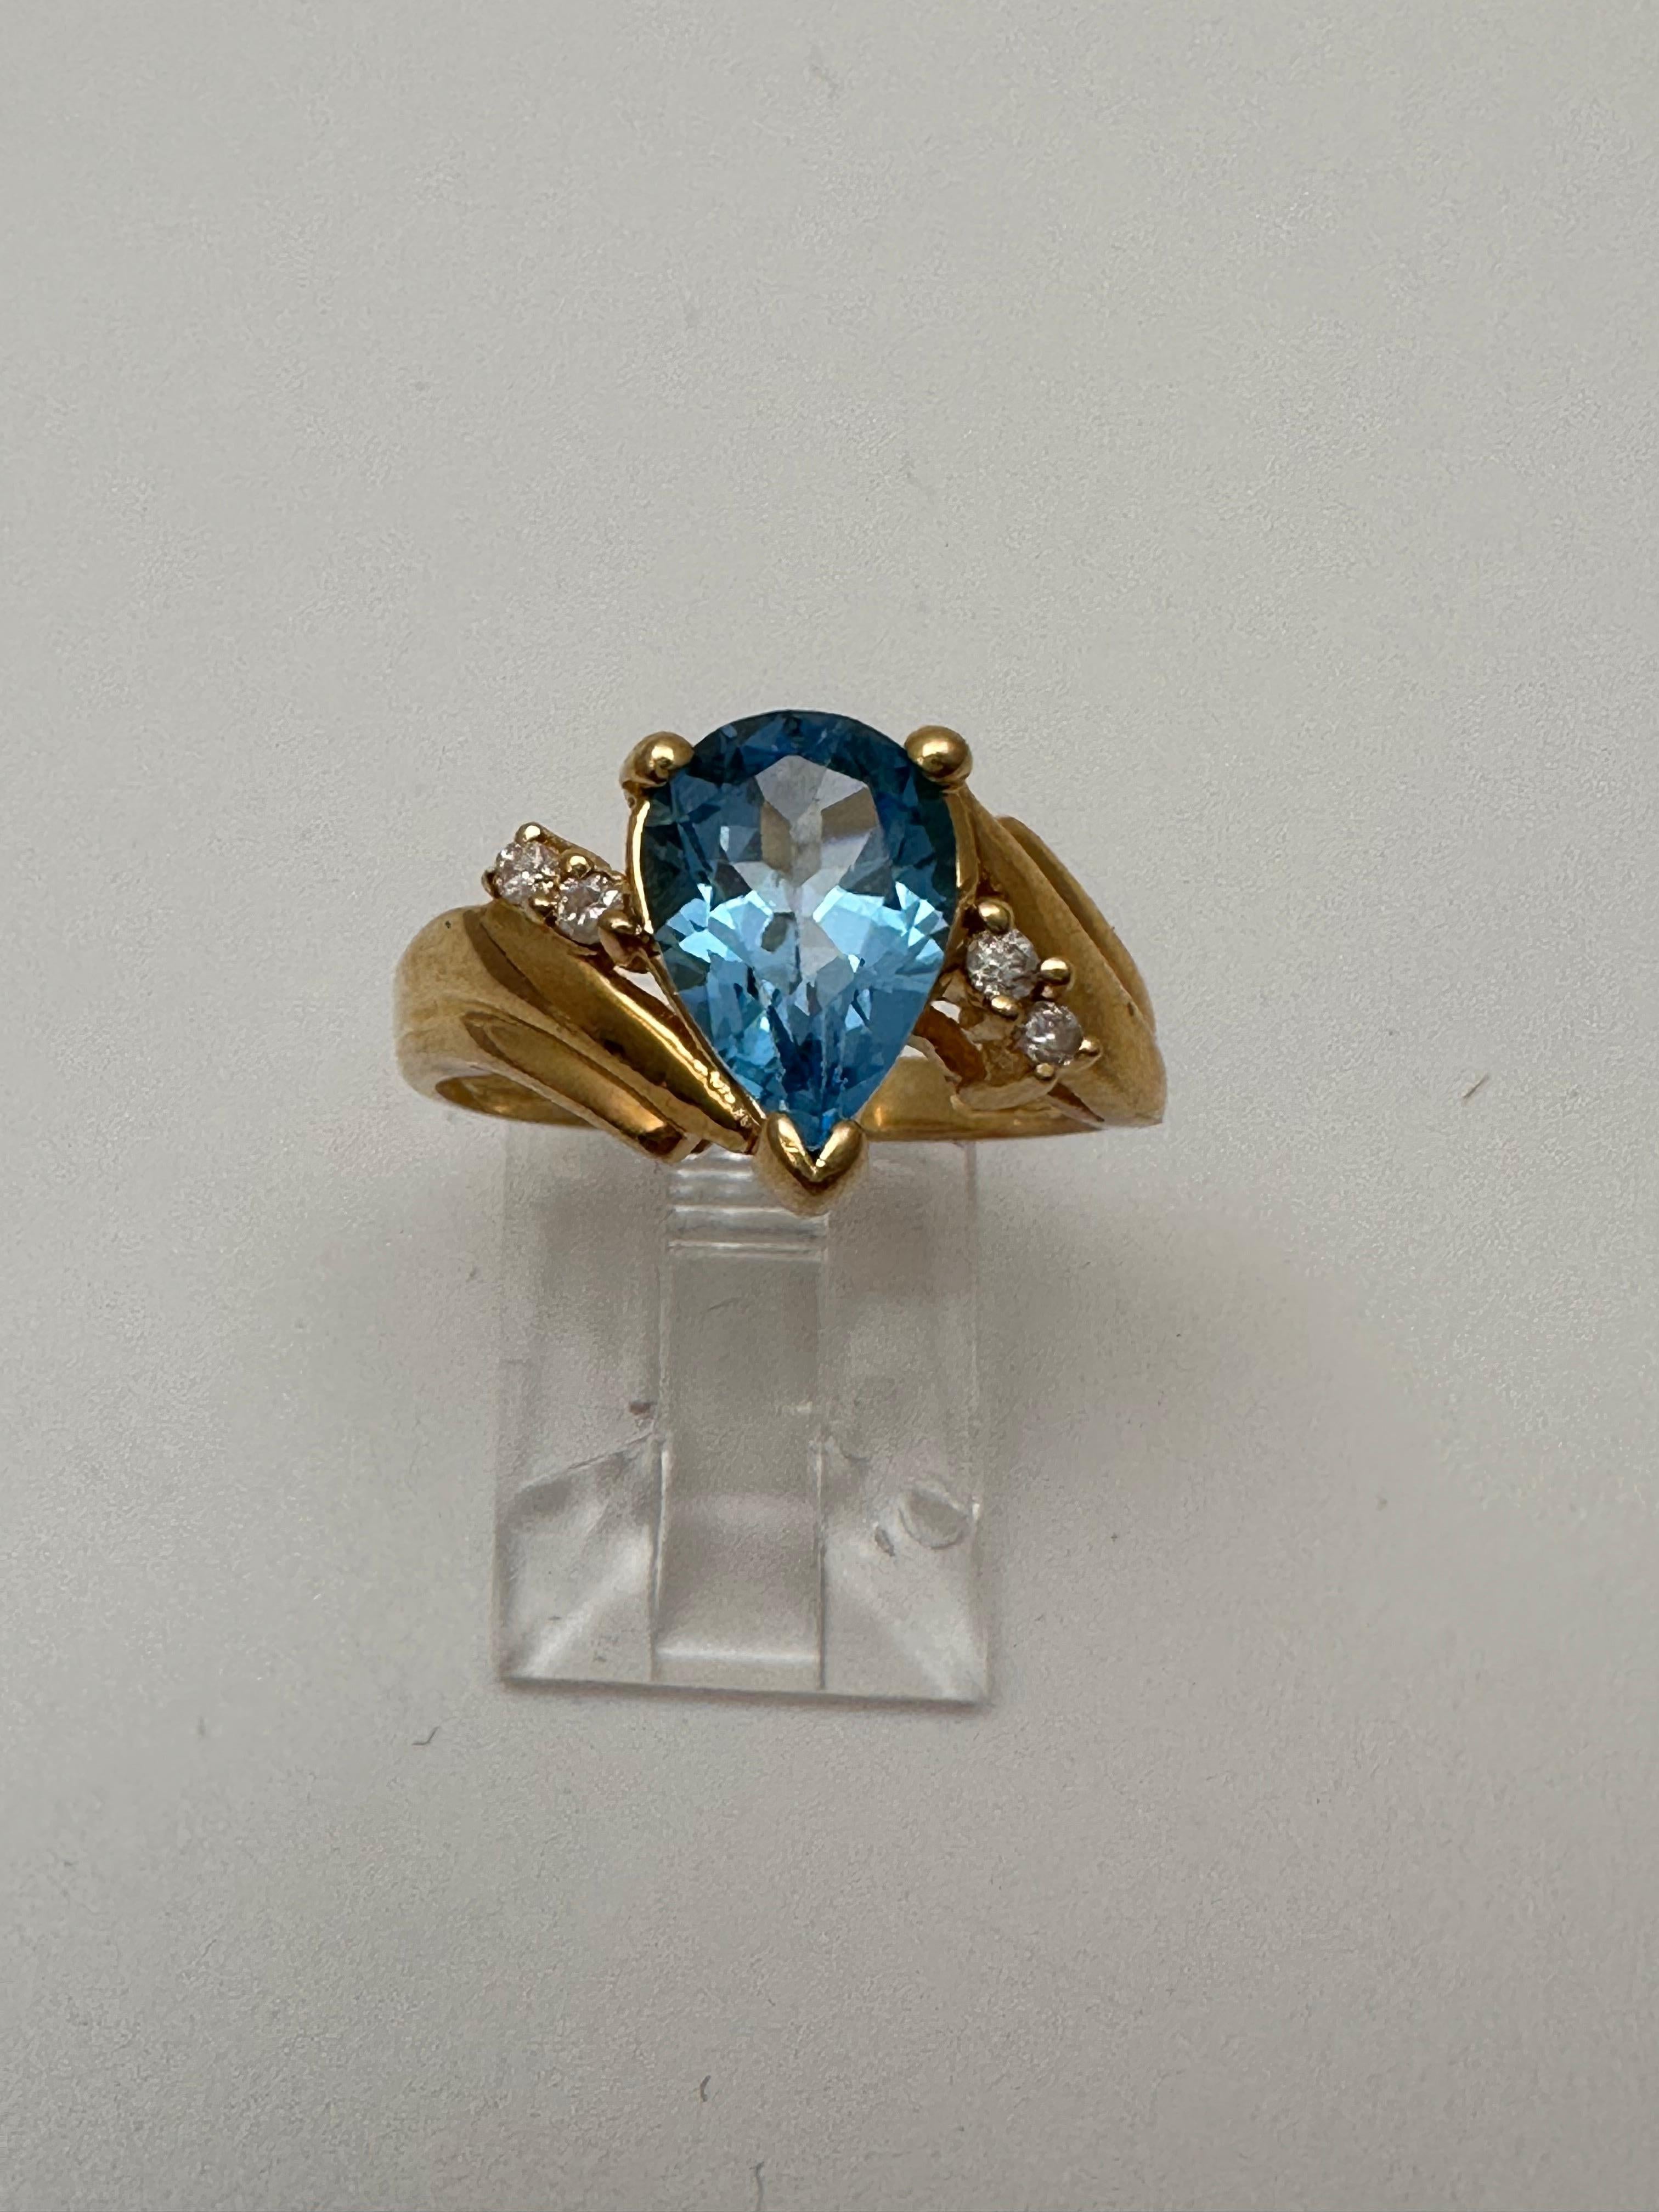 14k Yellow Gold 6.7mm x 10mm Pear Blue Topaz 4 Round Diamond Ring Size 6 1/2


This exquisite ring features a stunning approx. 6.7mm x 10mm pear-shaped blue topaz as the main stone, with four round diamonds. Crafted from 14k yellow gold, this ring